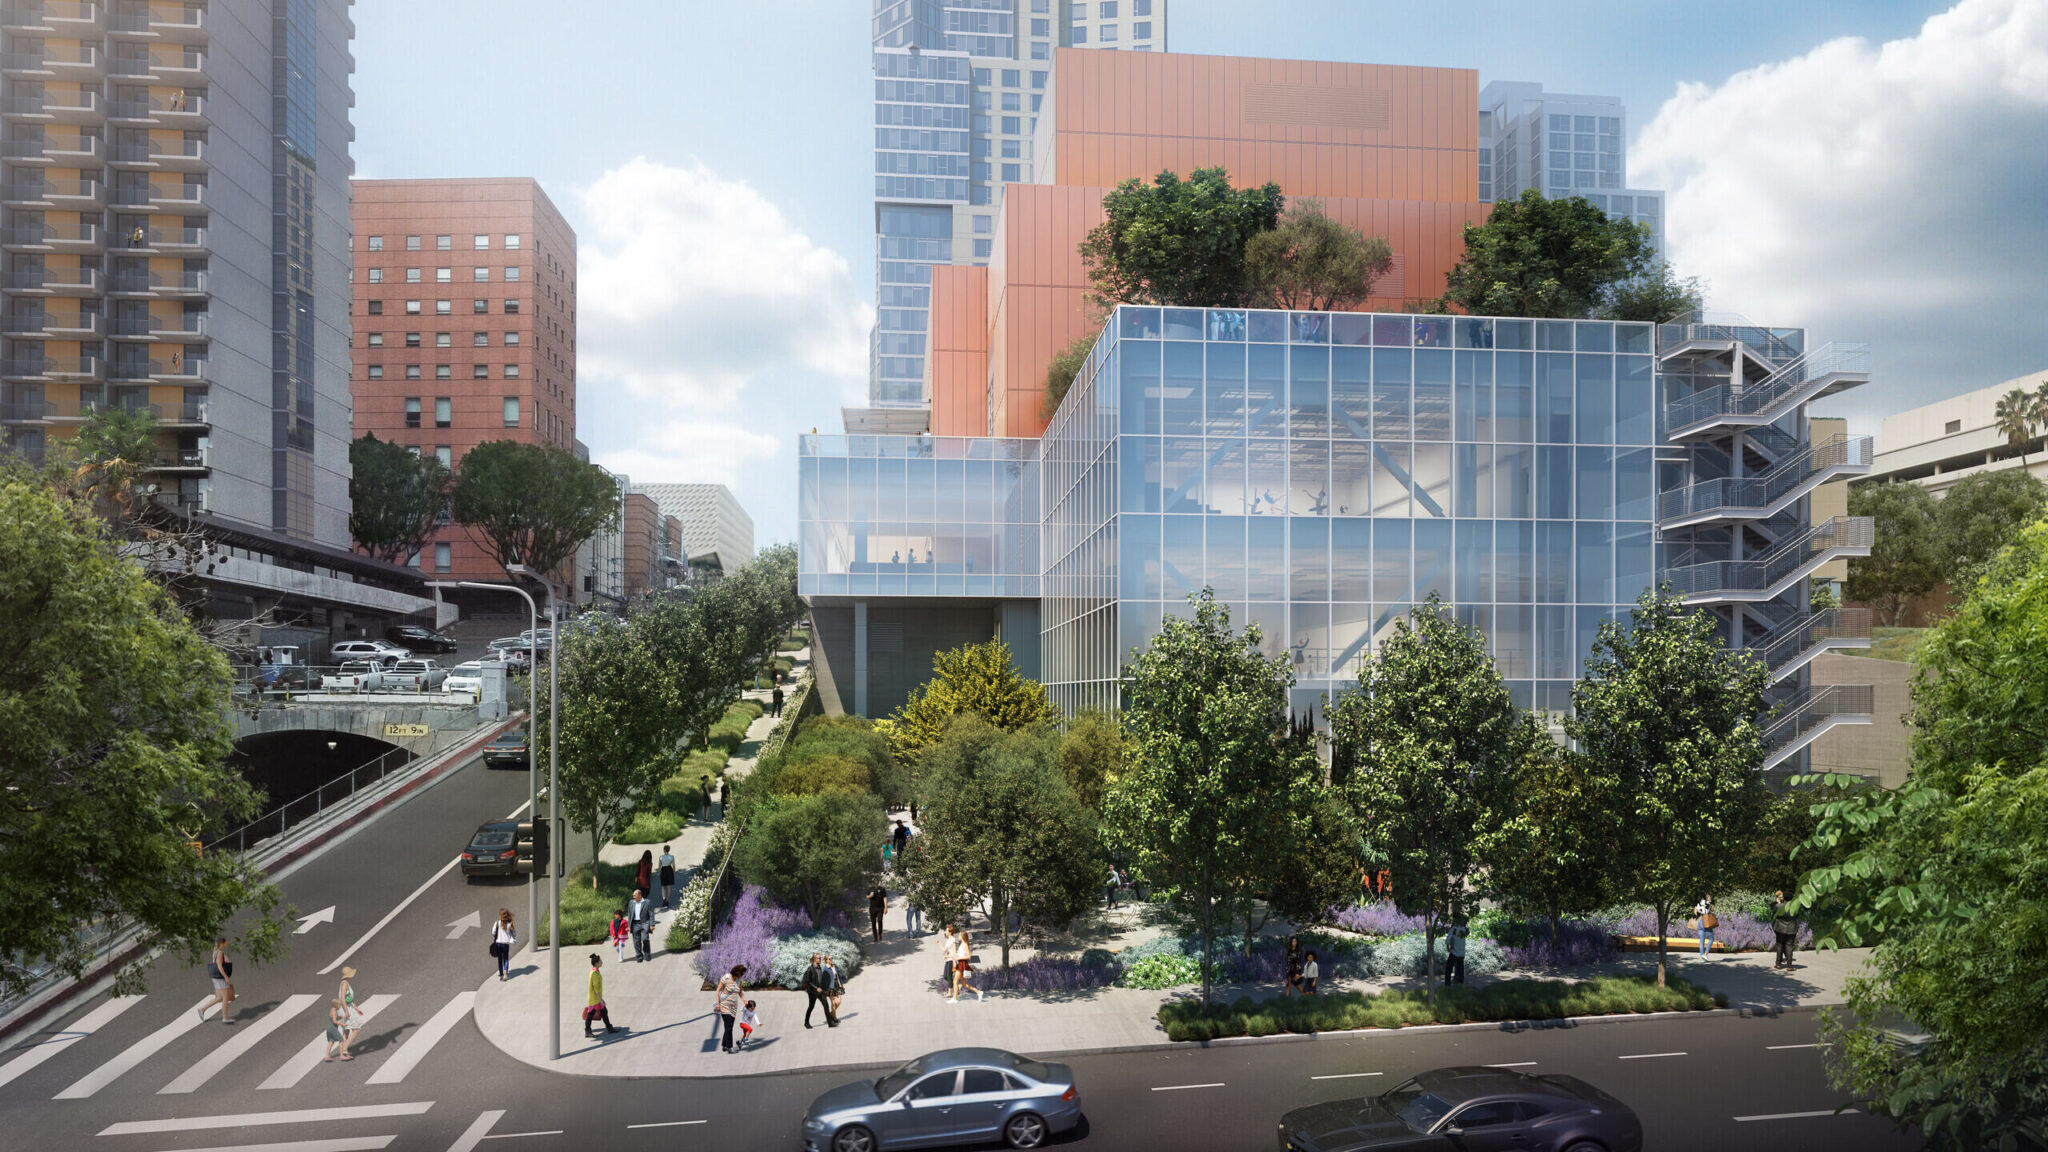 Rendering of the Colburn Center at the Colburn School. View from Hill Street West towards dance school entrance, dance studios, and public garden. Courtesy Frank O. Gehry & Gehry Partners, LLP